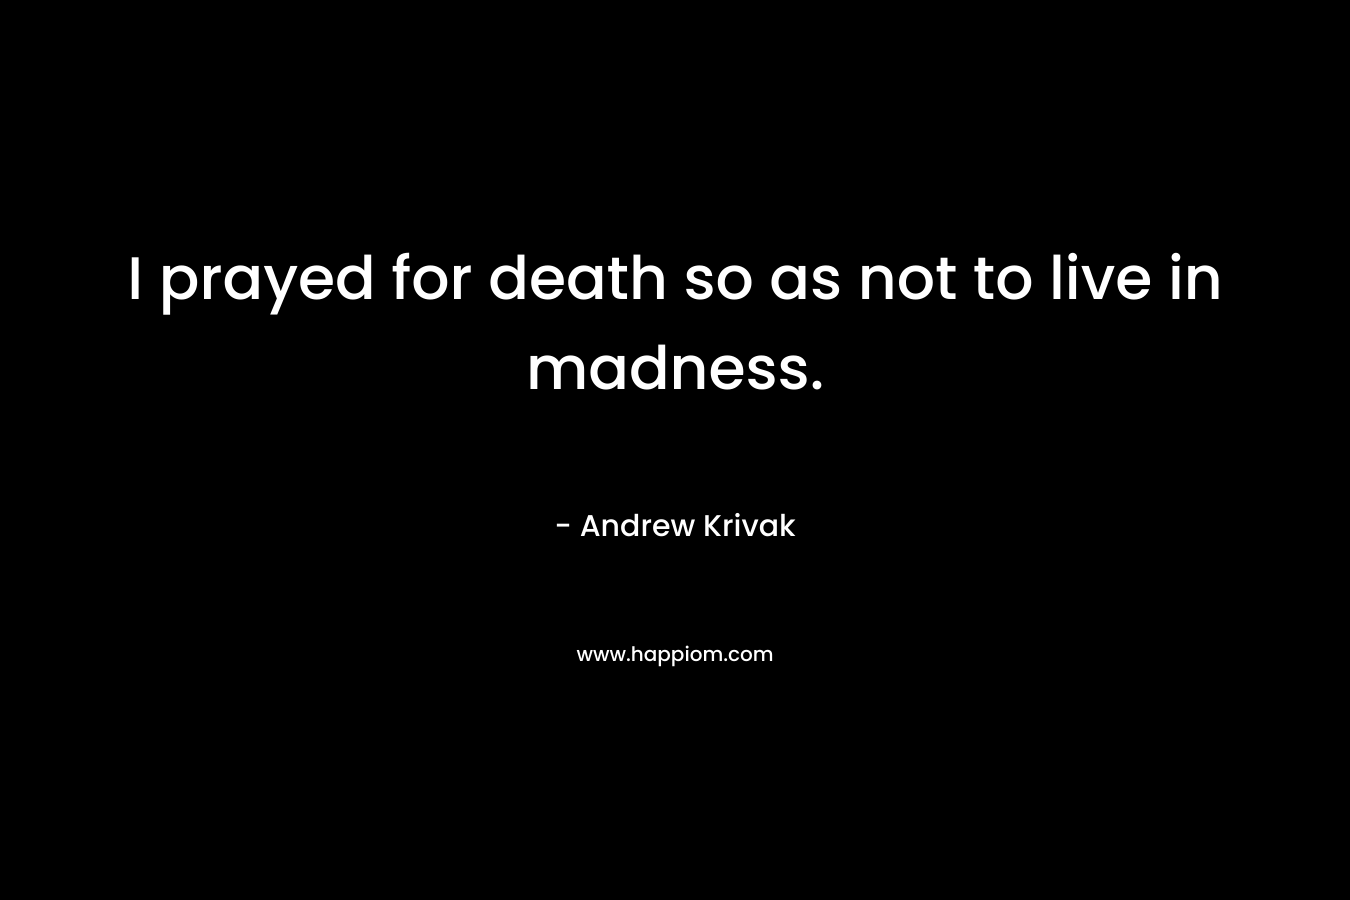 I prayed for death so as not to live in madness. – Andrew Krivak